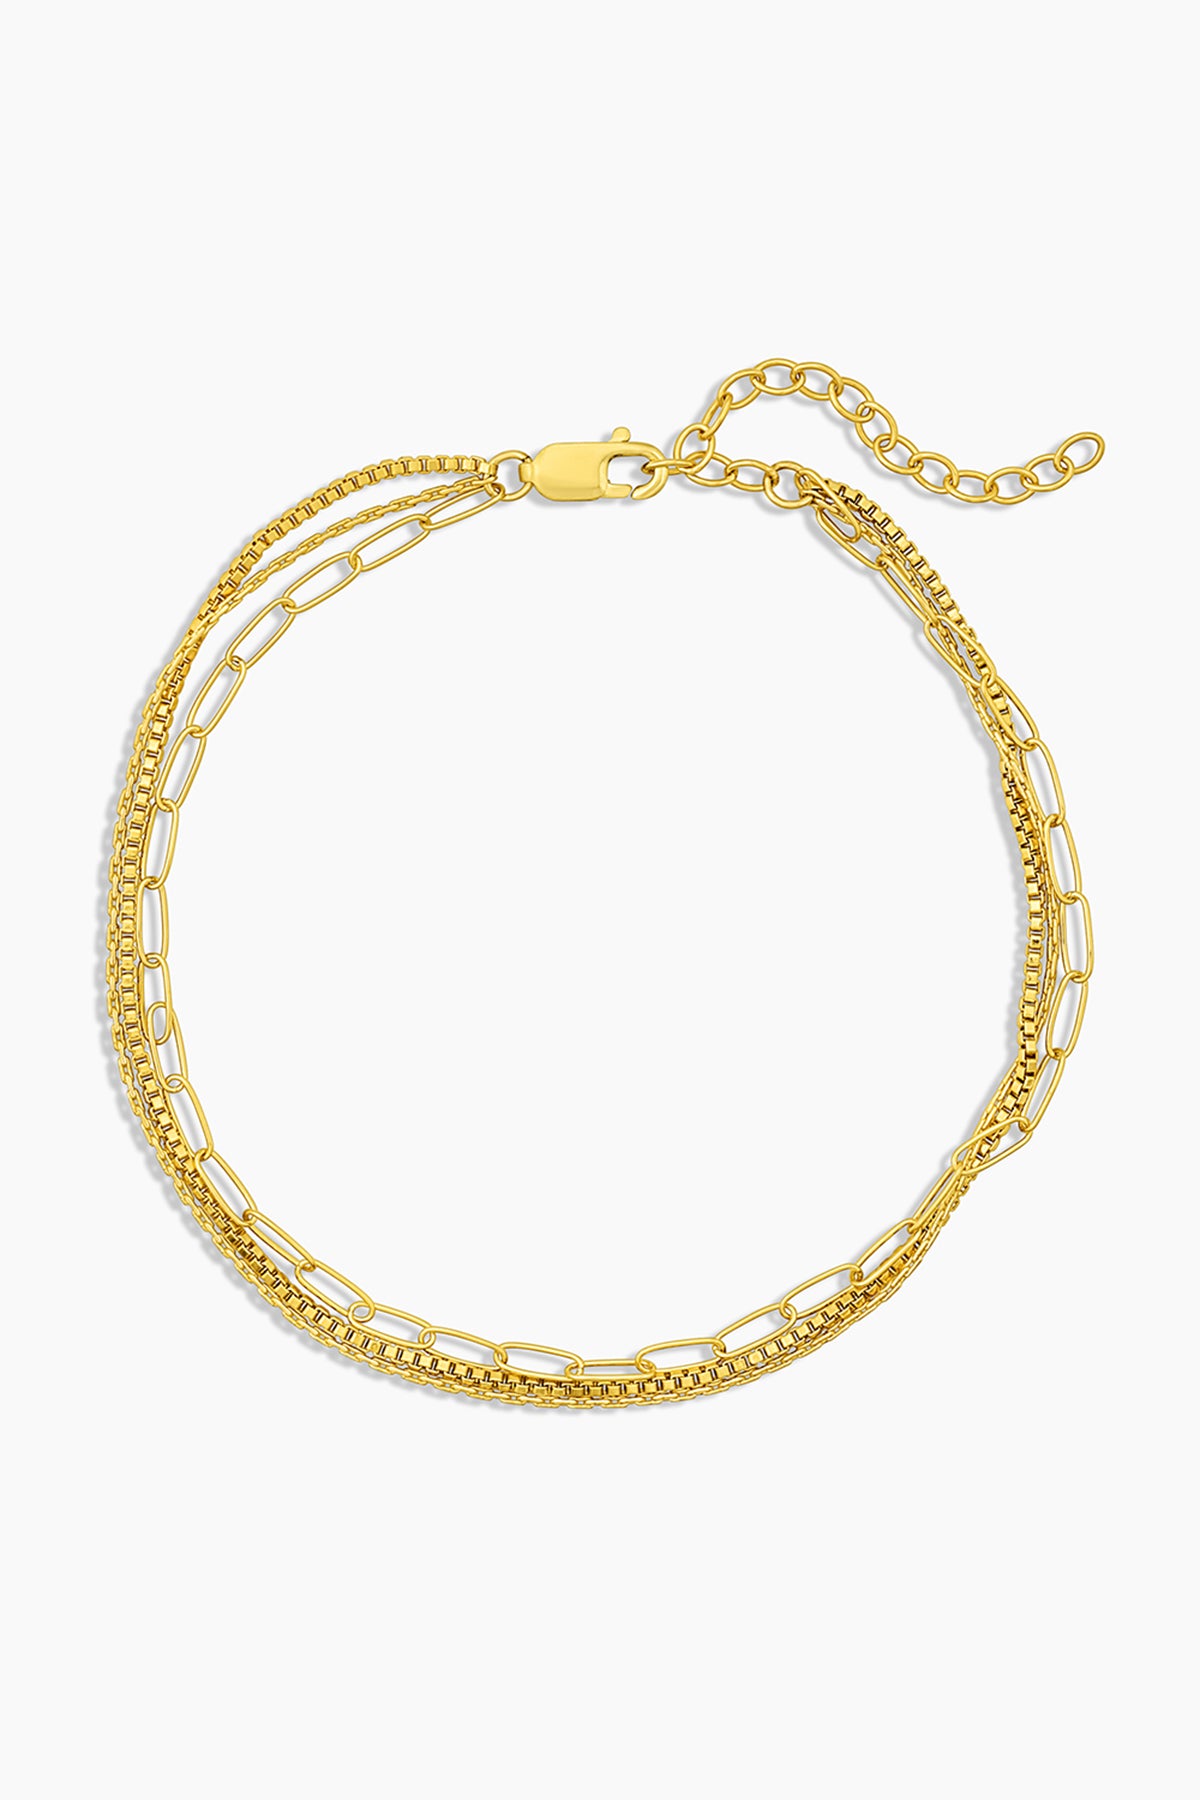 A ROSALIE TRIPLE STRAND BRACELET BY Thatch with a chain link clasp.-35526316196033